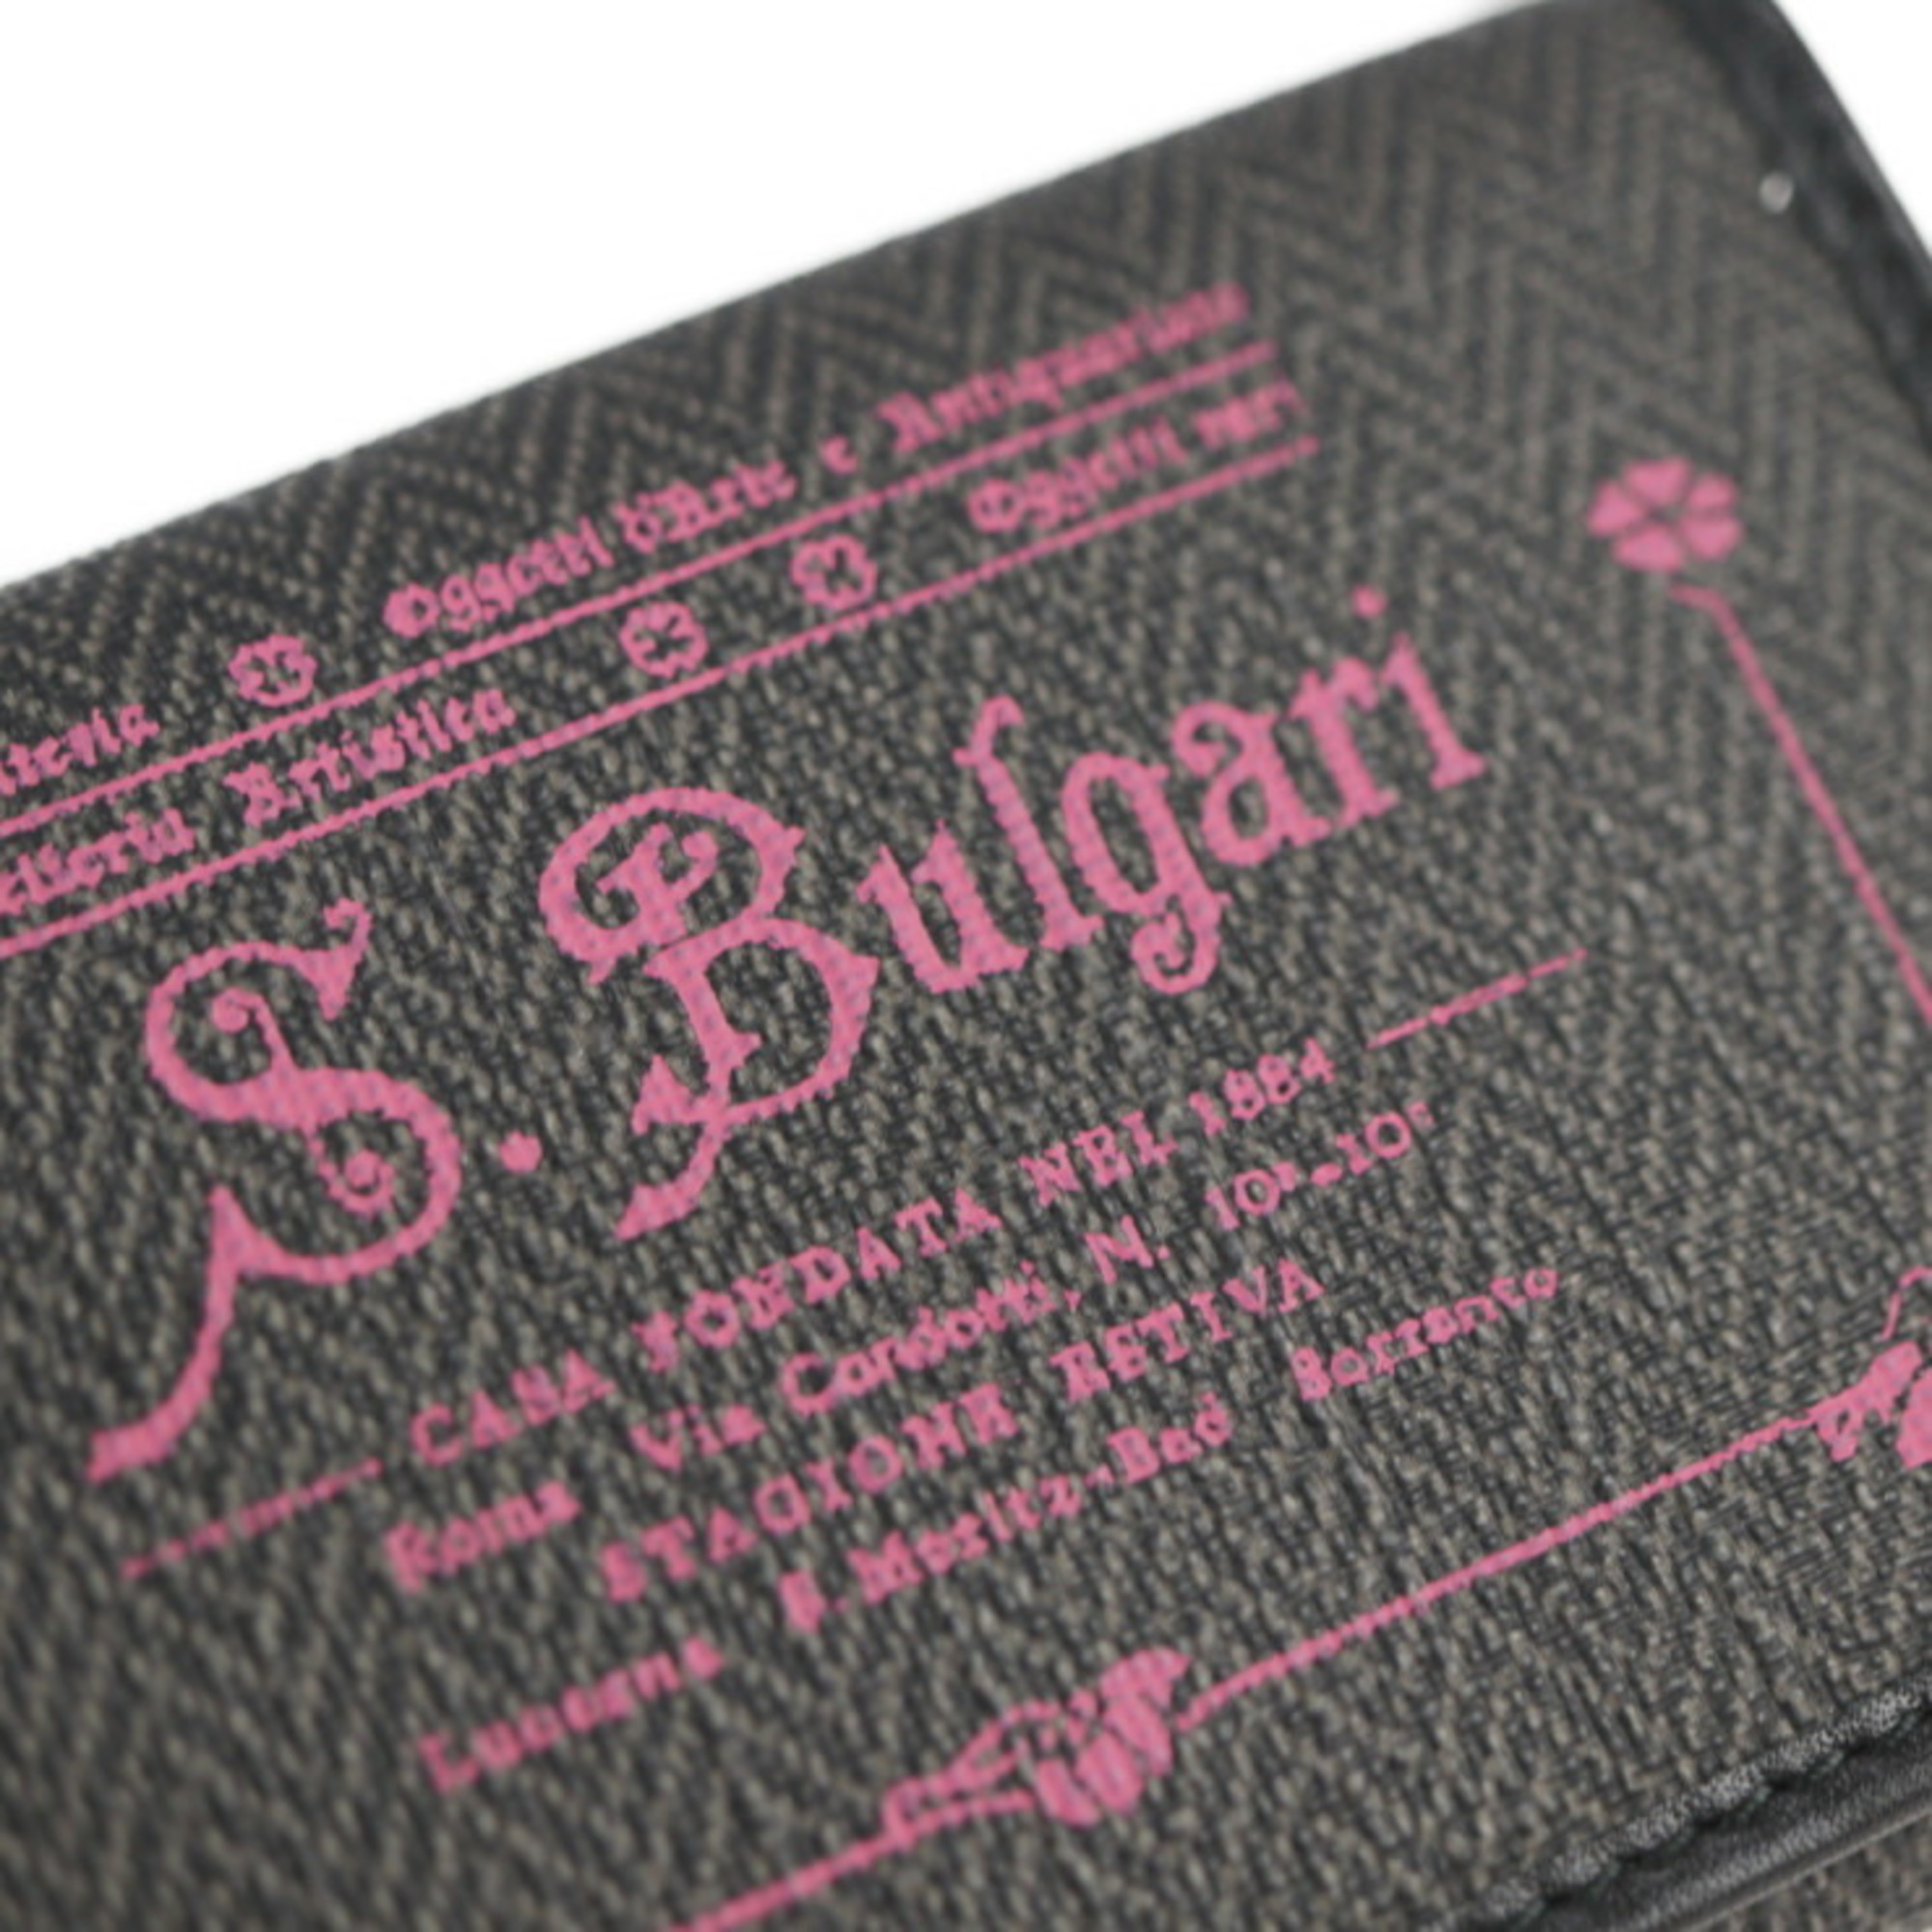 BVLGARI Bulgari Collezione key case 32439 PVC coated canvas leather gray black pink silver metal fittings 6 rows